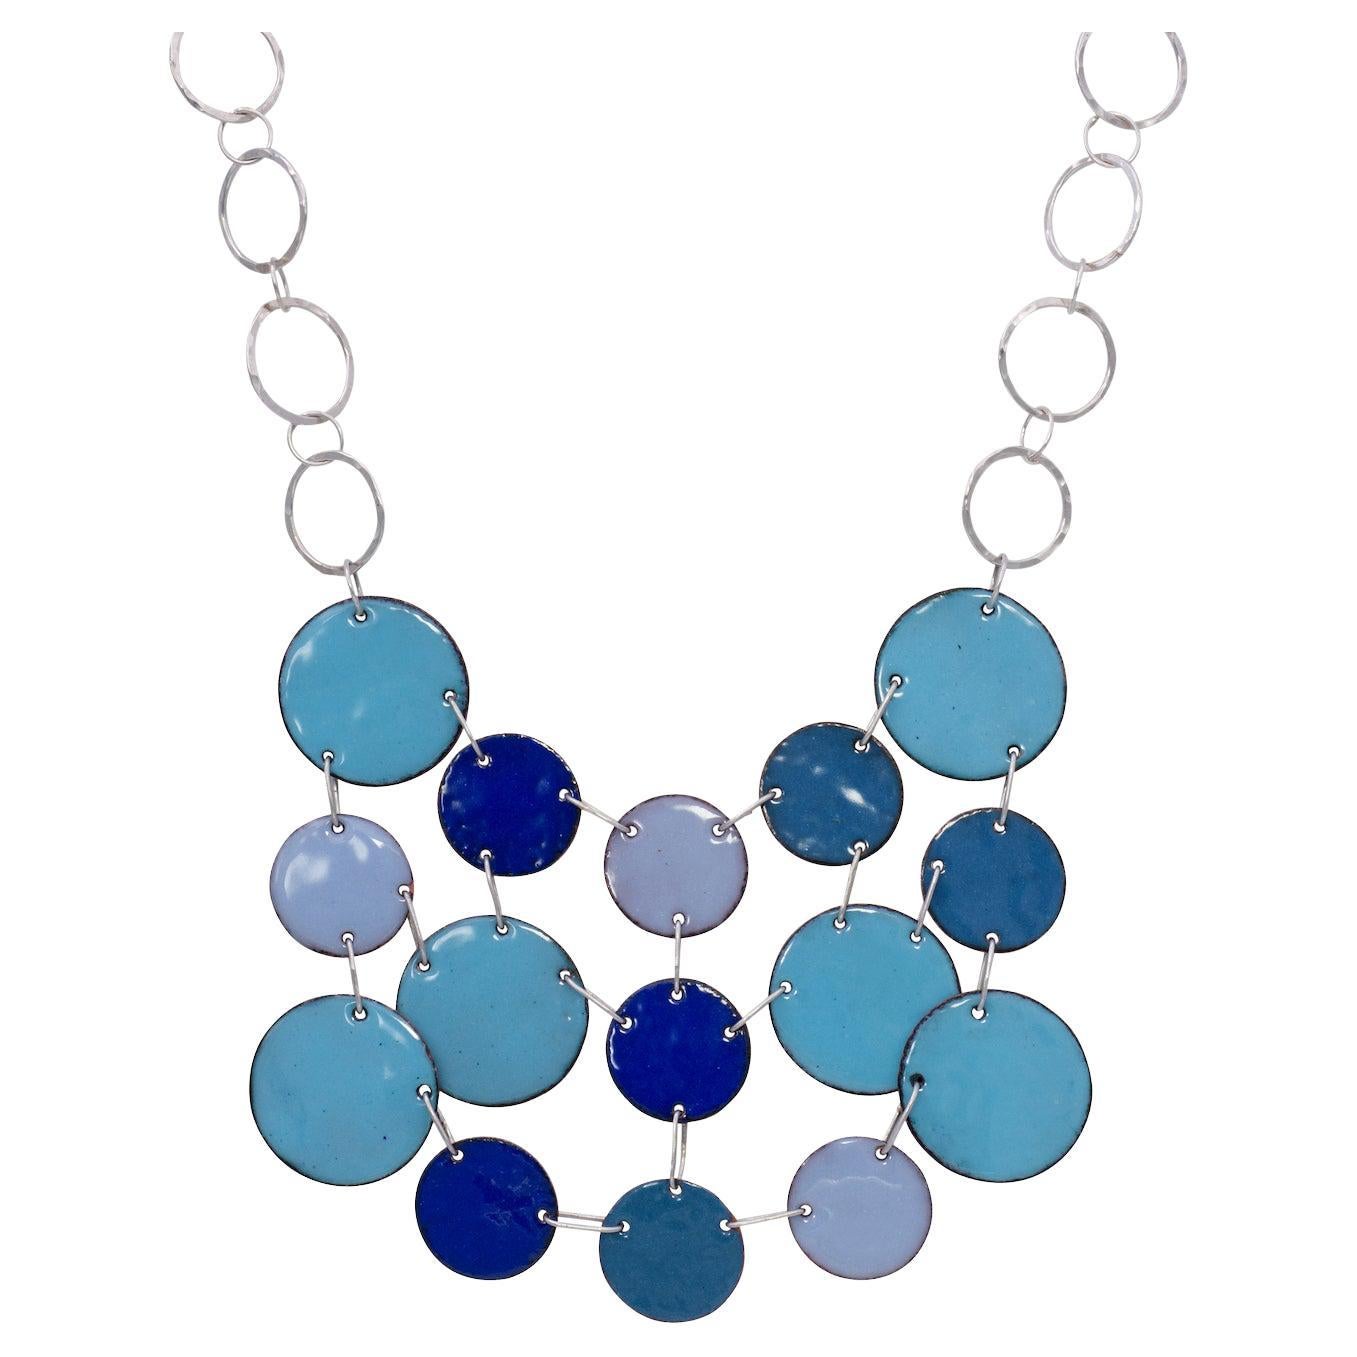 Shades of Blue Sterling Silver Bib Necklace with Enamel Hand painted  Discs. For Sale